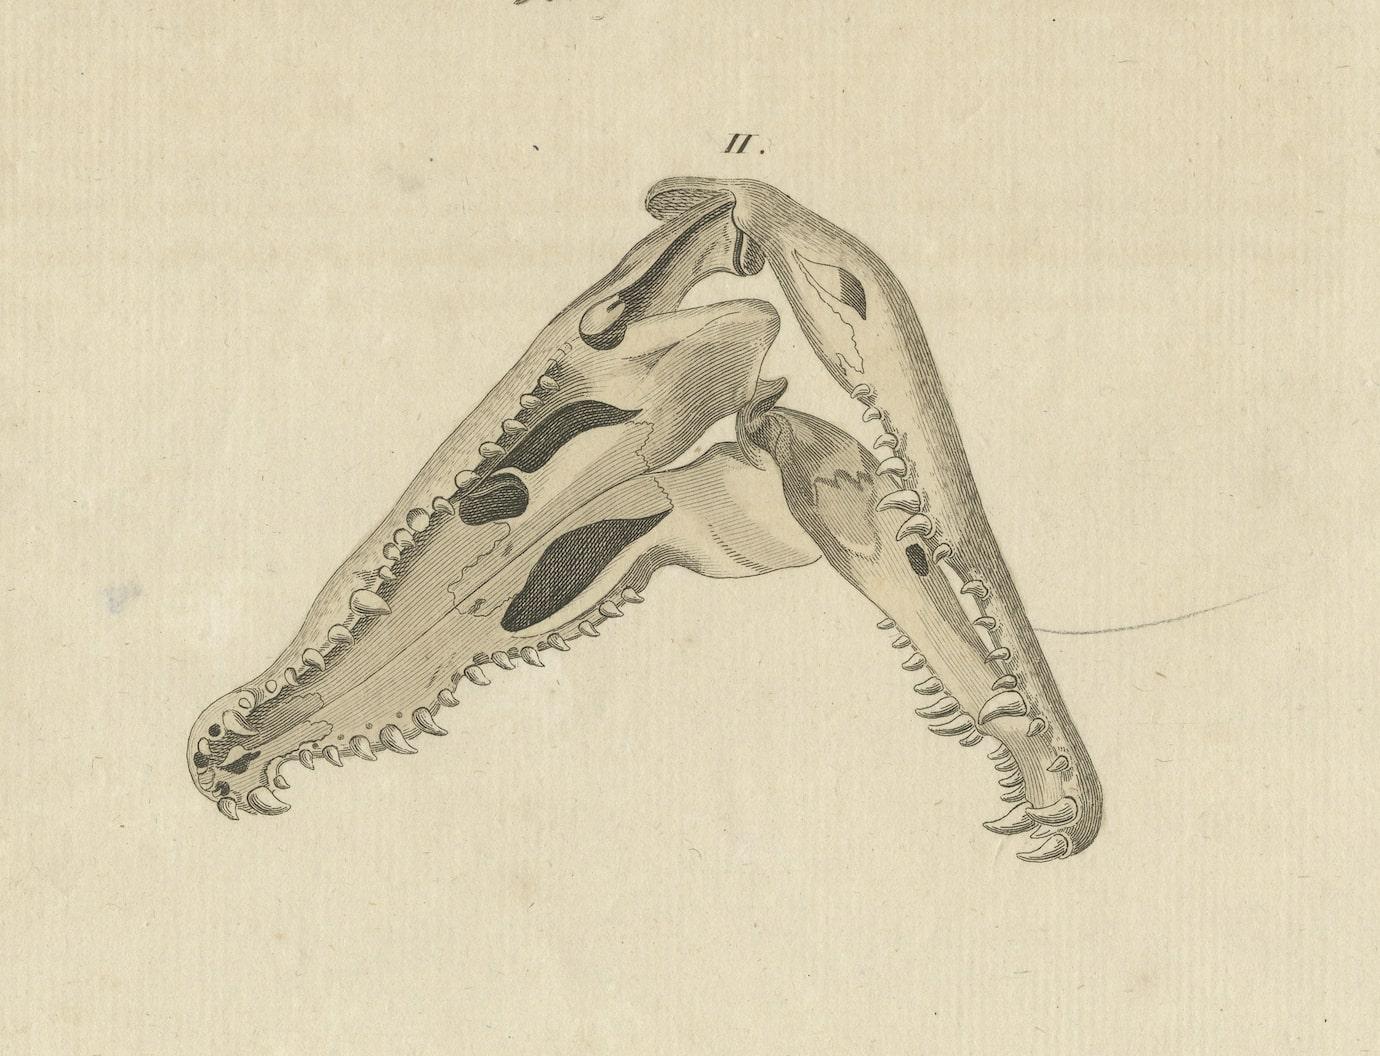 Antique print of the Santo Domingo crocodile and a crocodile skull. This print originates from 'Bilderbuch fur Kinder' by F.J. Bertuch. Friedrich Johann Bertuch (1747-1822) was a German publisher and man of arts most famous for his 12-volume